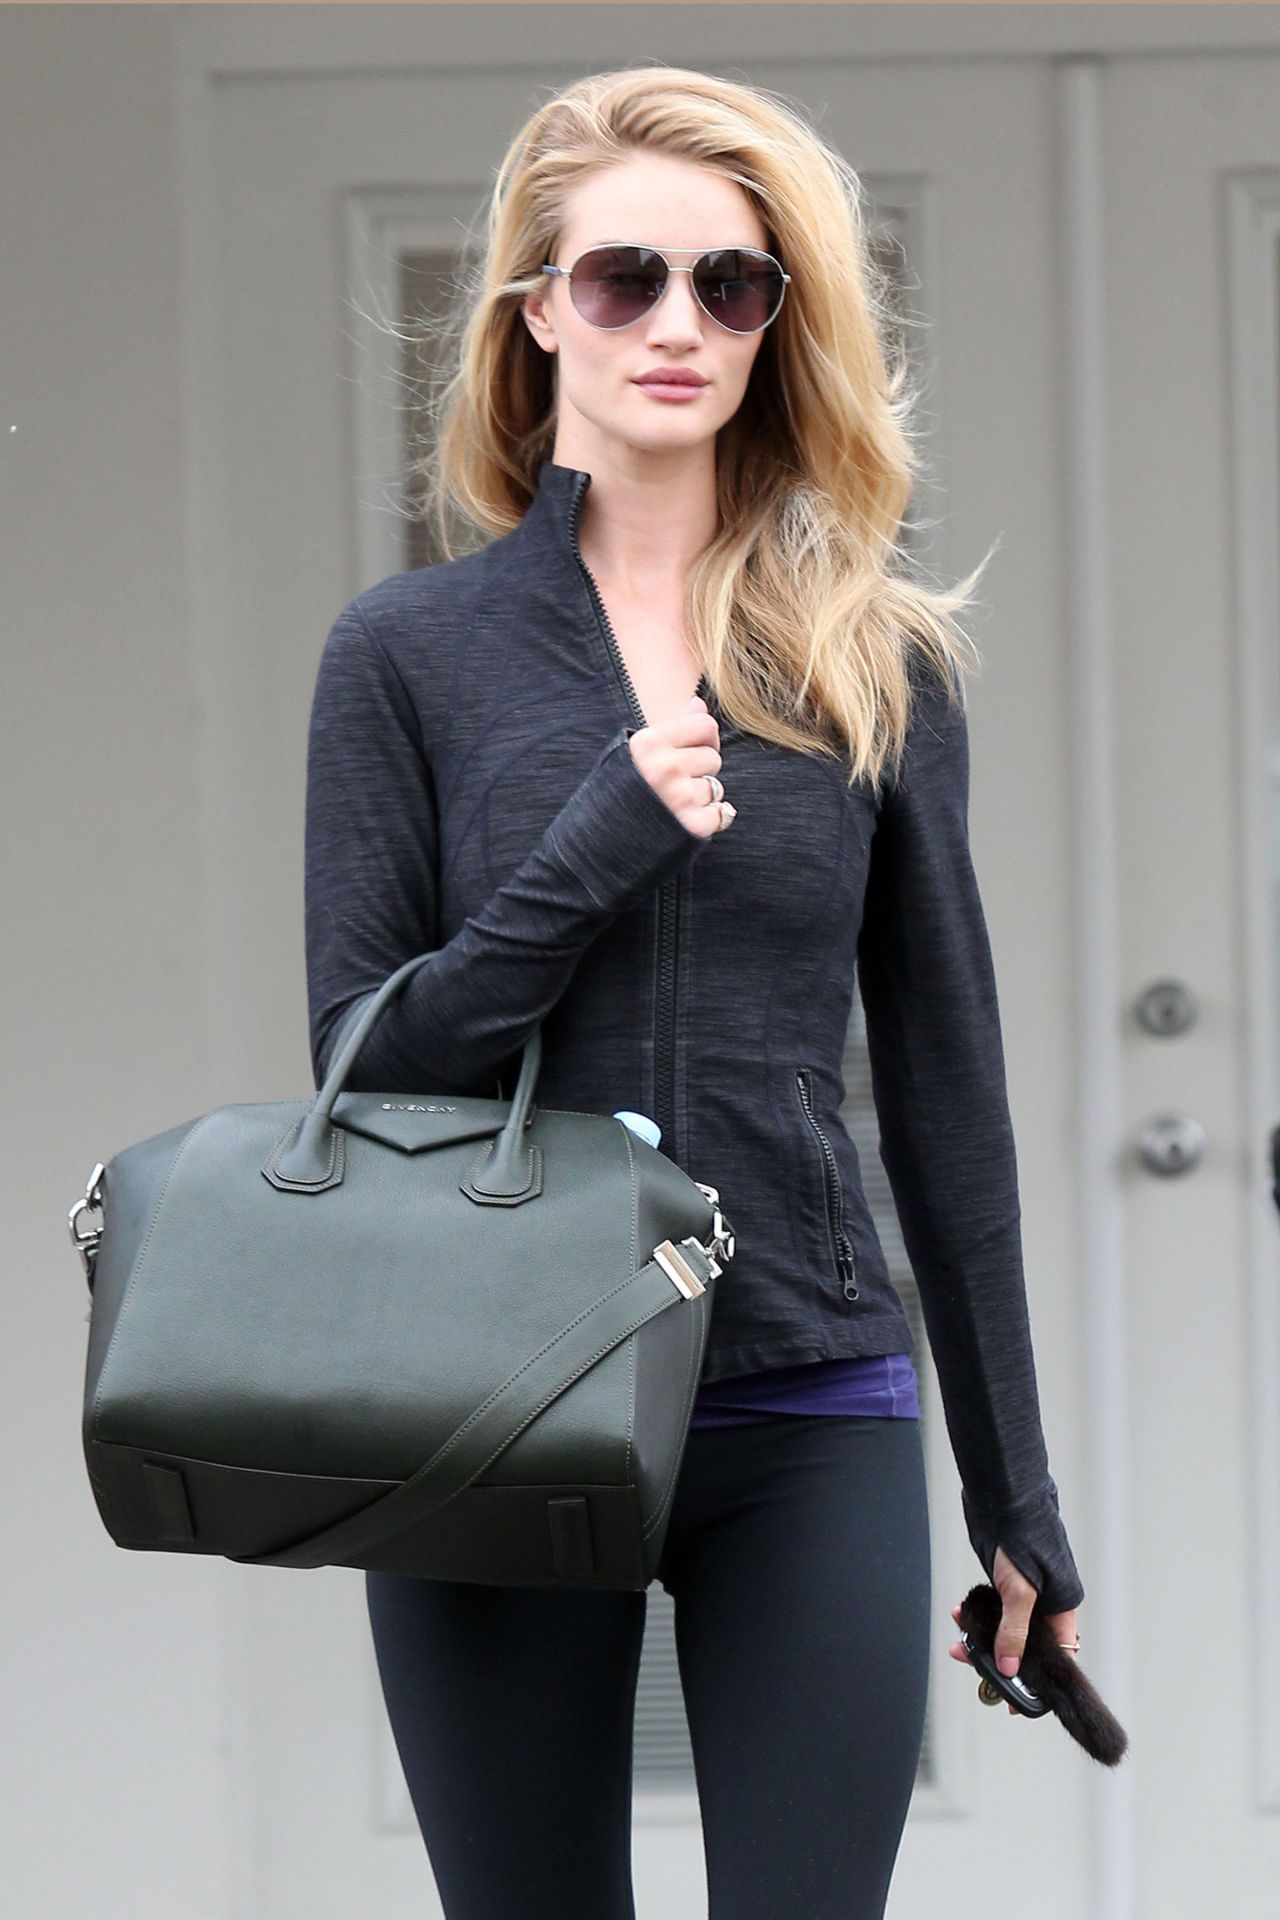 Rosie Huntington-Whiteley Style - Leaving the Gym - Los Angeles ...